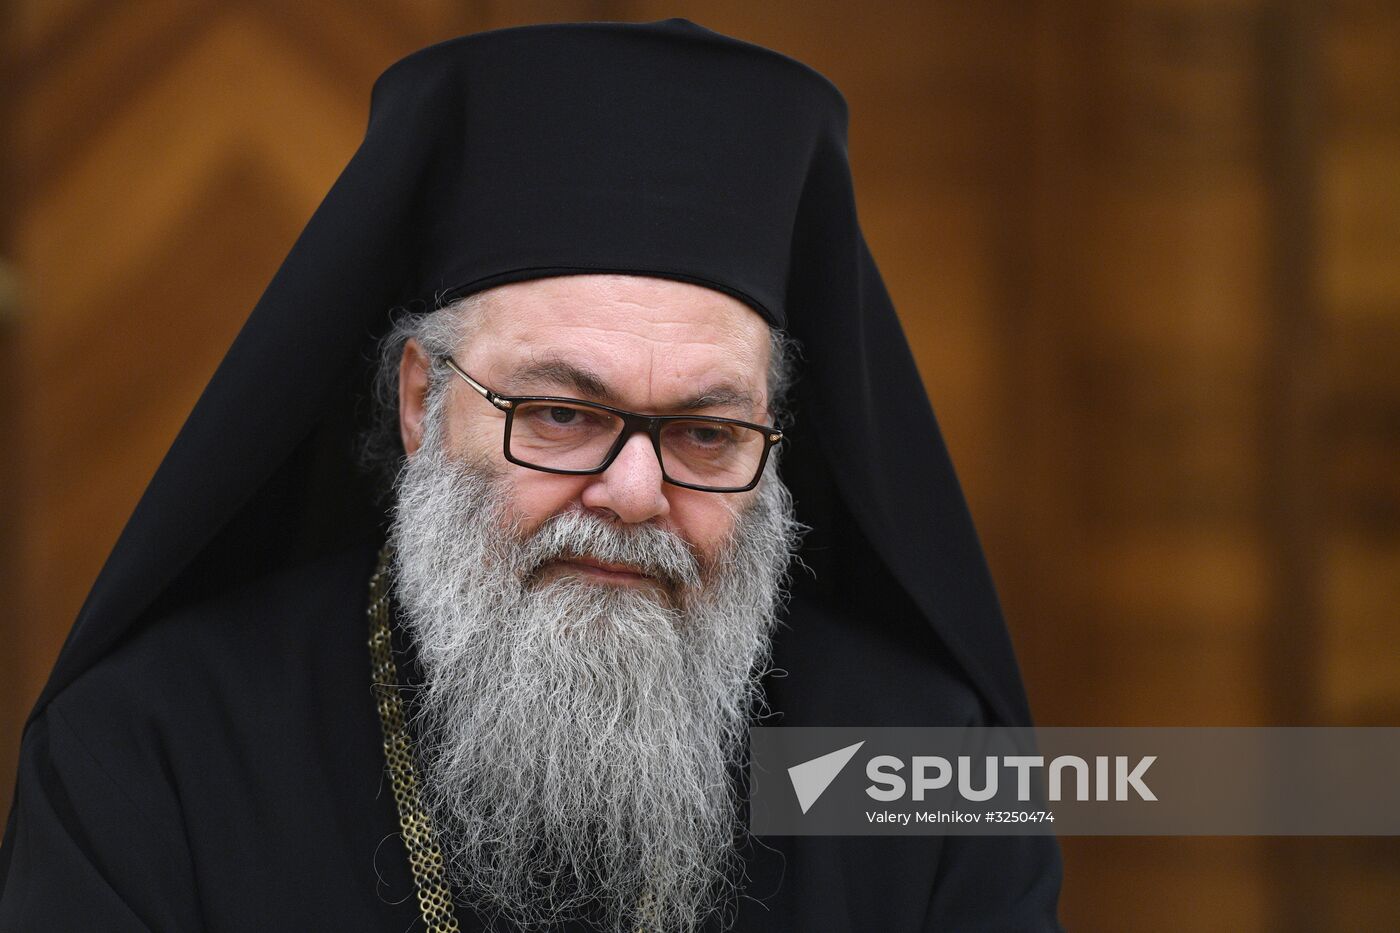 Russian Foreign Minister Sergei Lavrov meets with Patriarch John X of Antioch and All the East